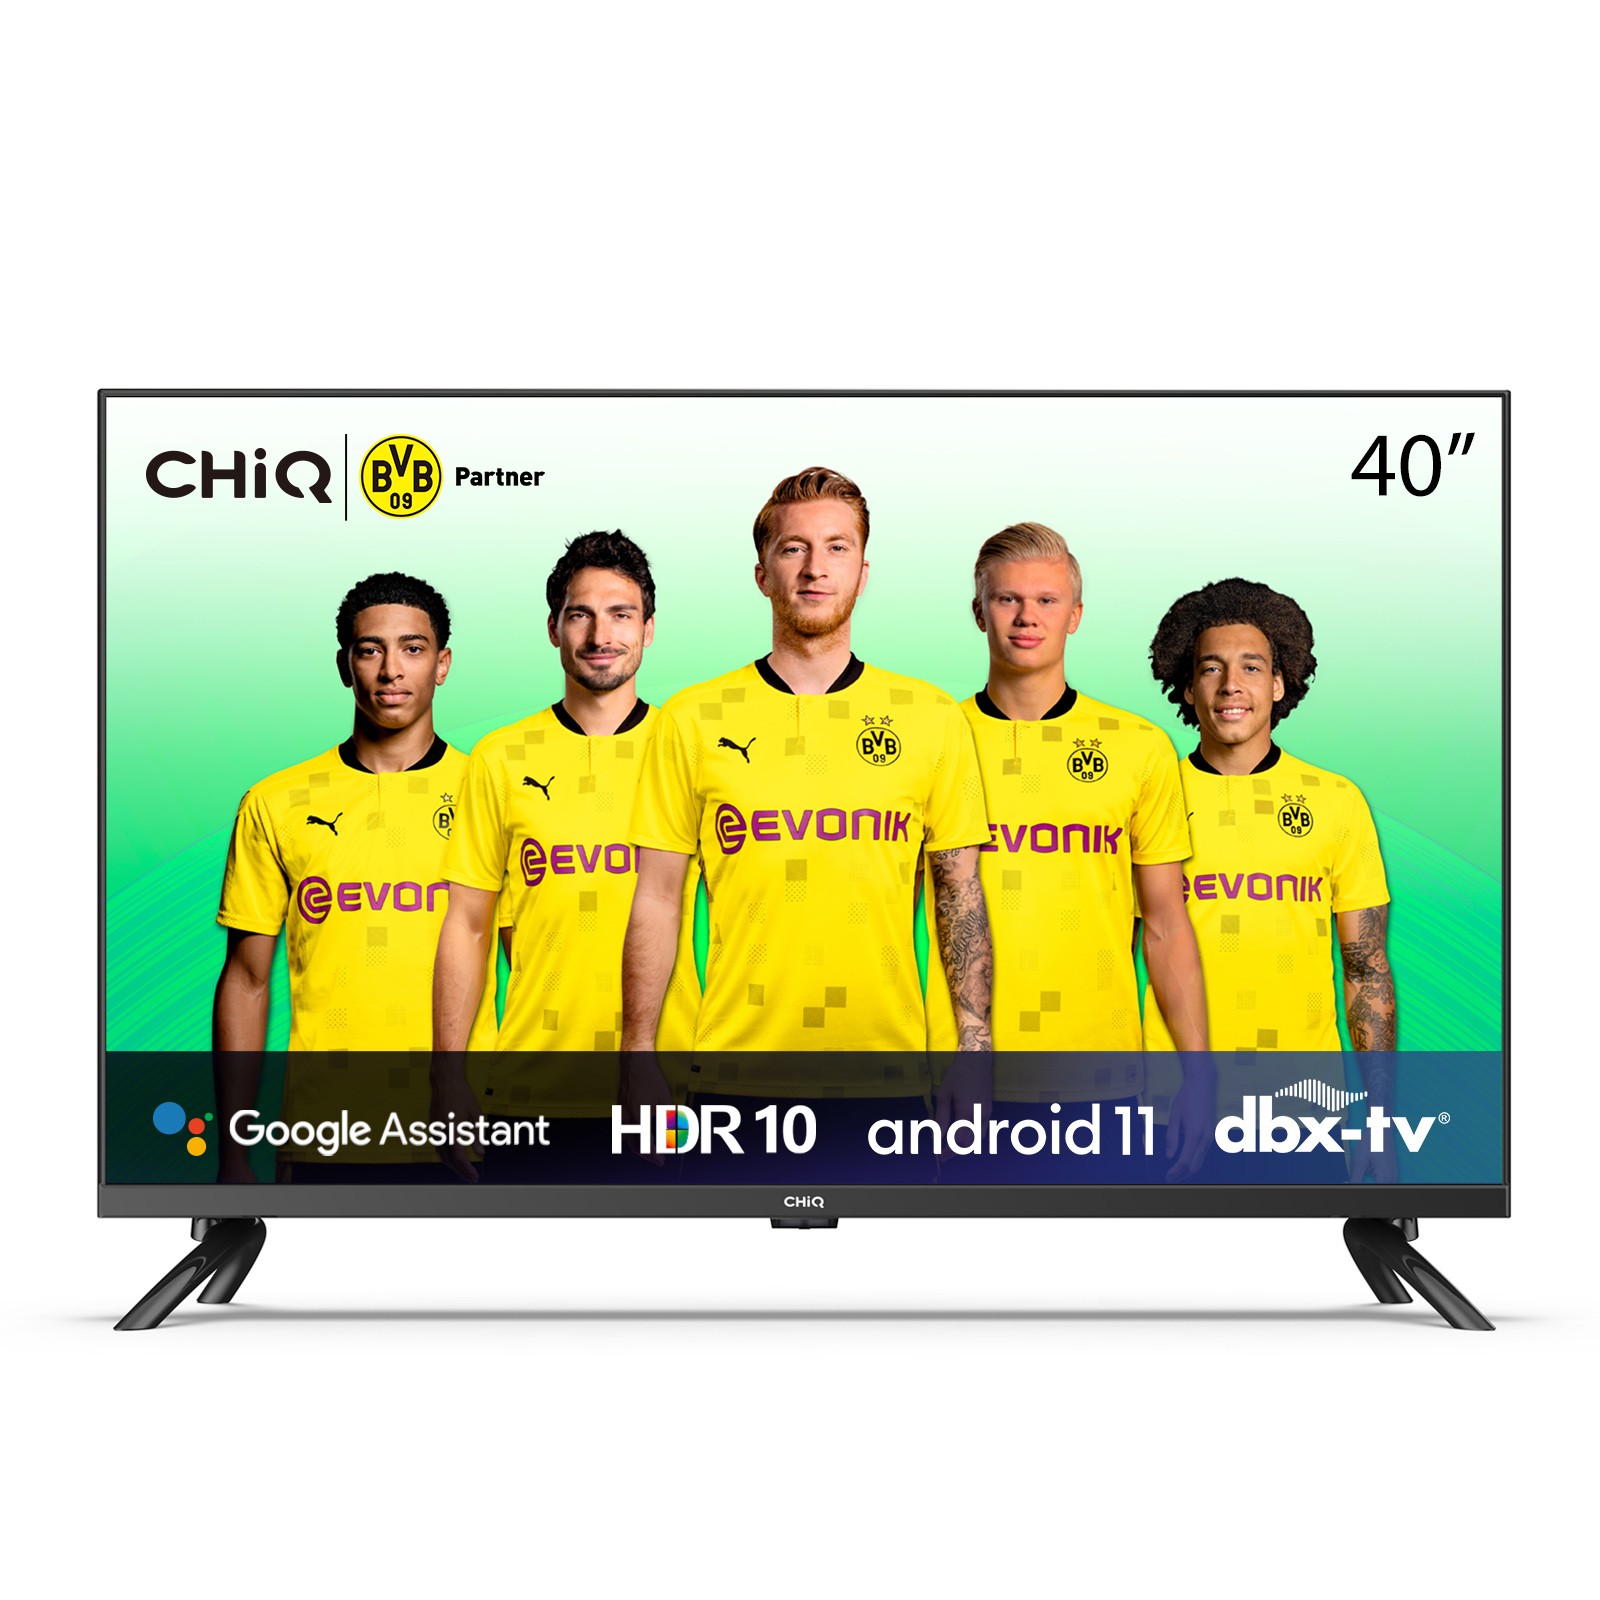 Chiq 40" L40G7P FHD Android Smart Tv